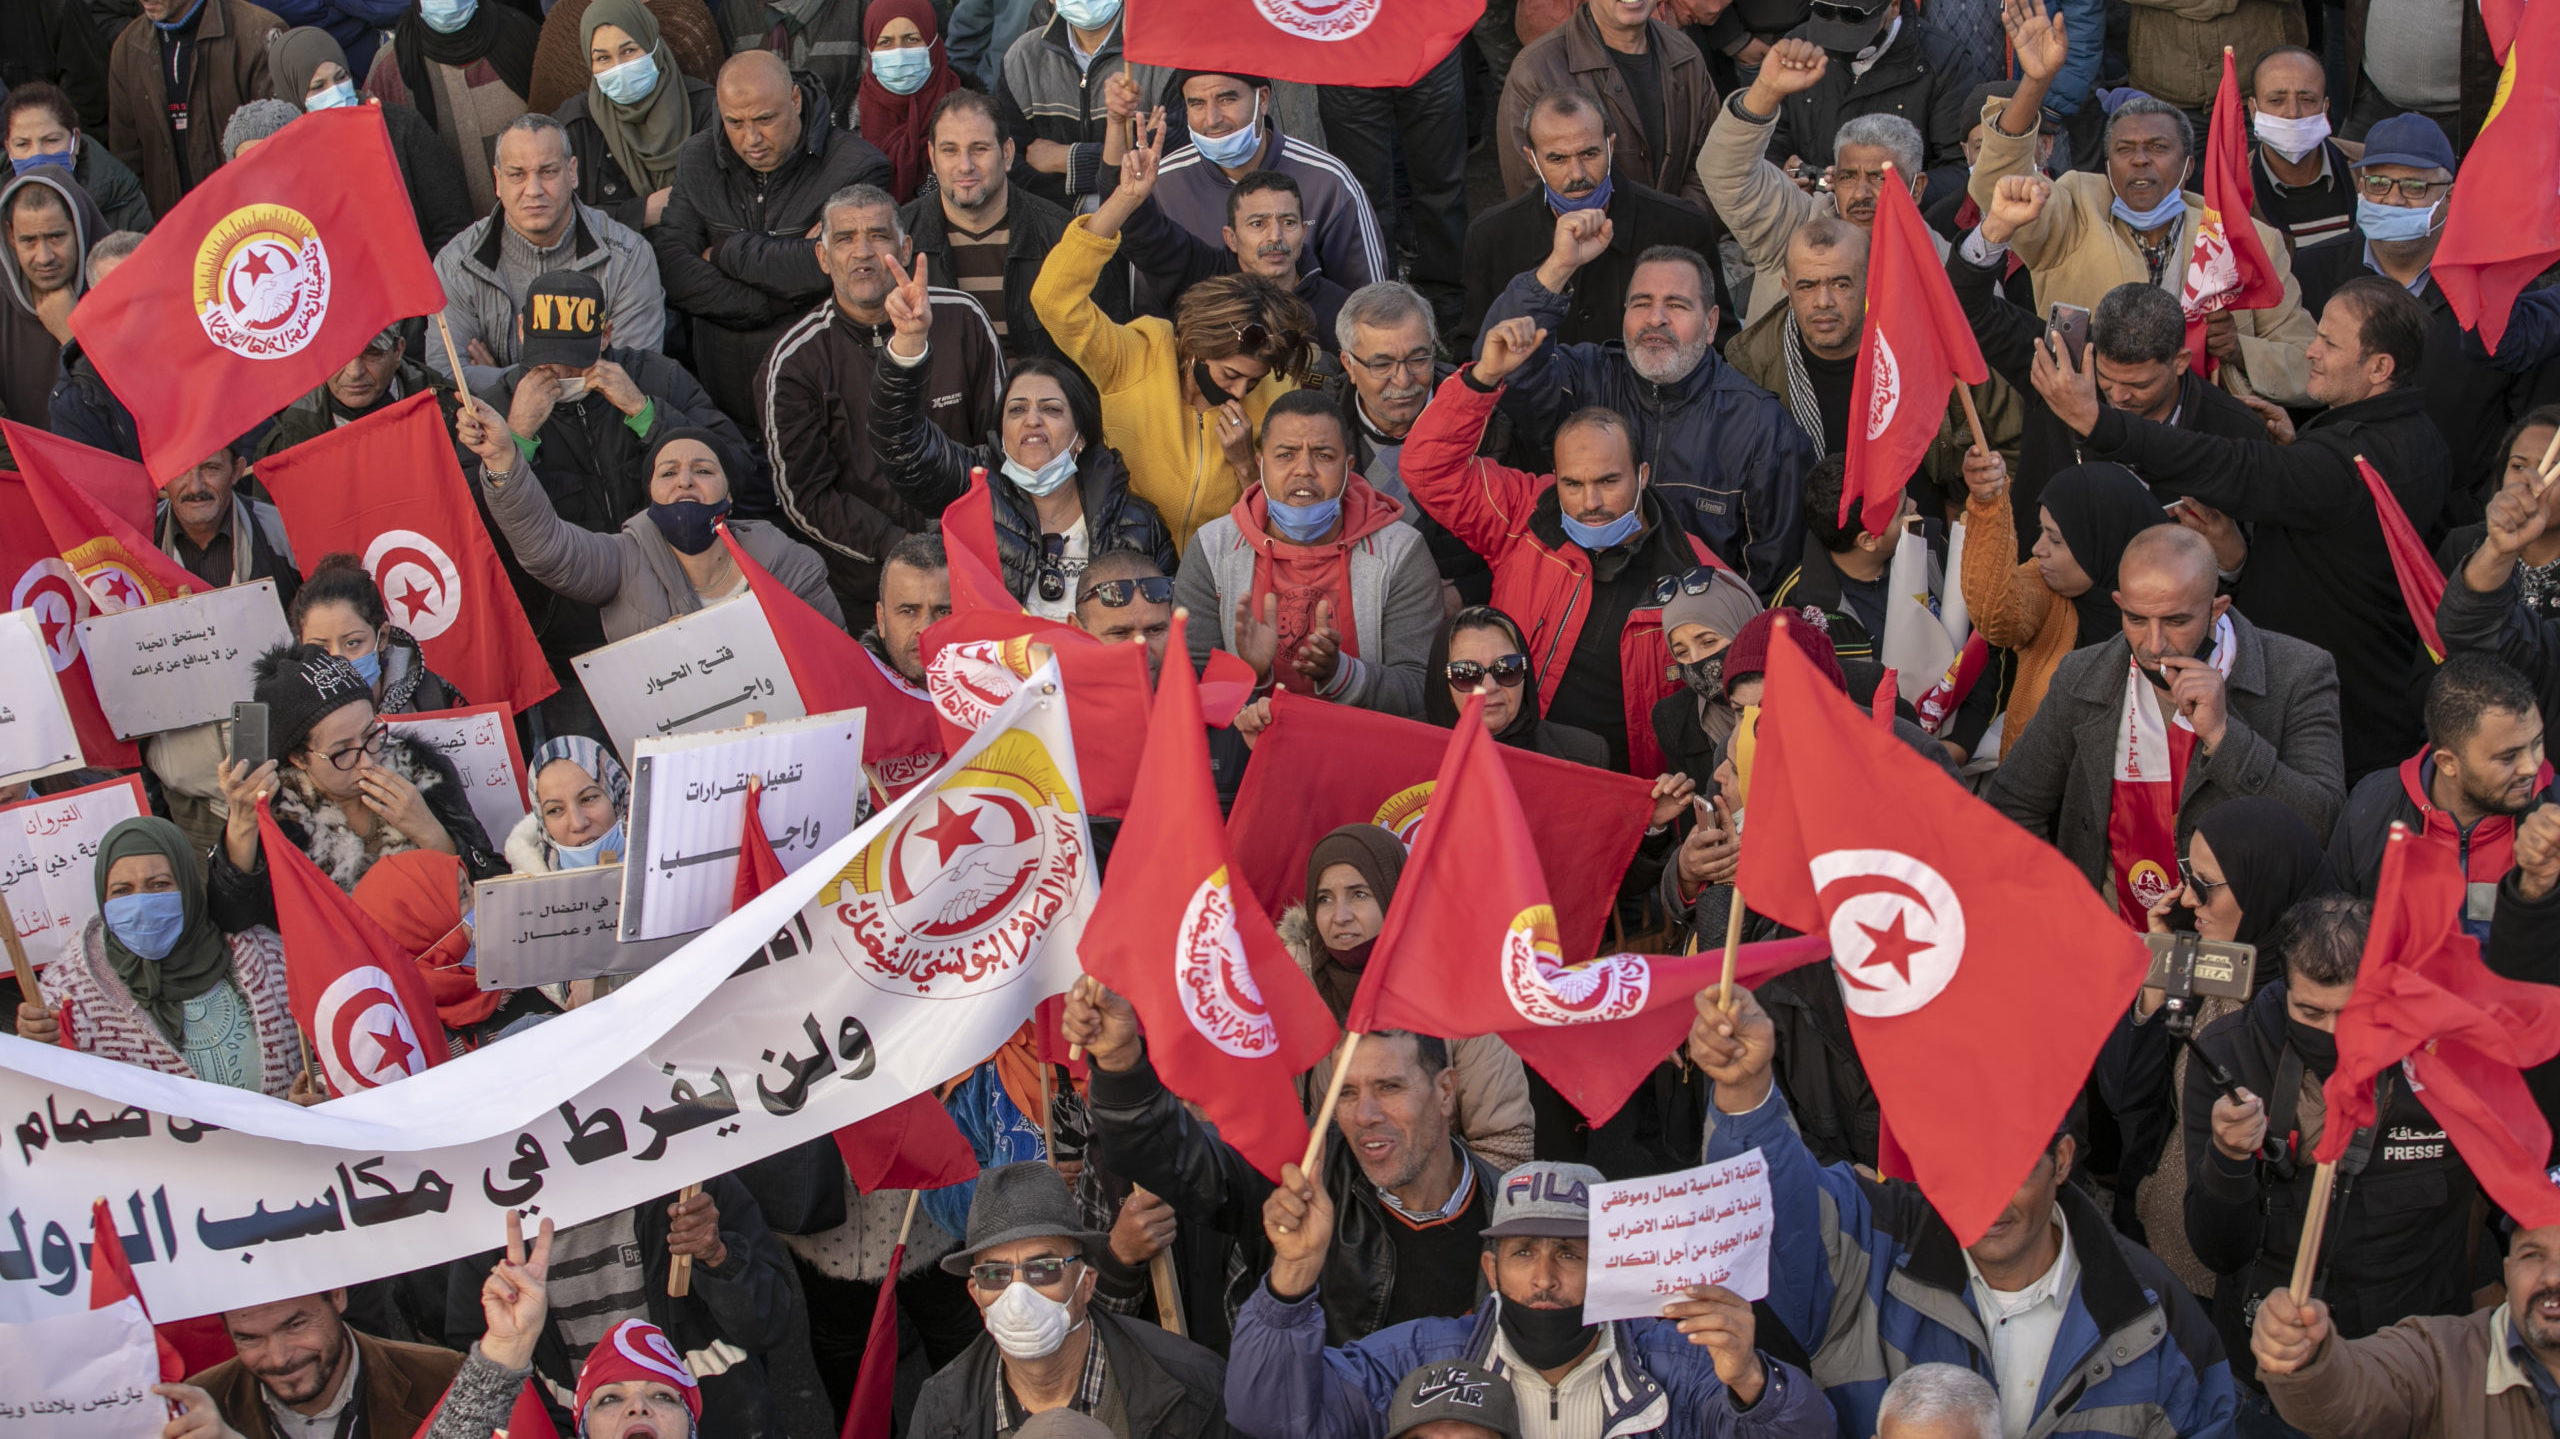 Tunisians Stage Sit-Ins at Vital Industrial Sites, Protesting Ailing Economy